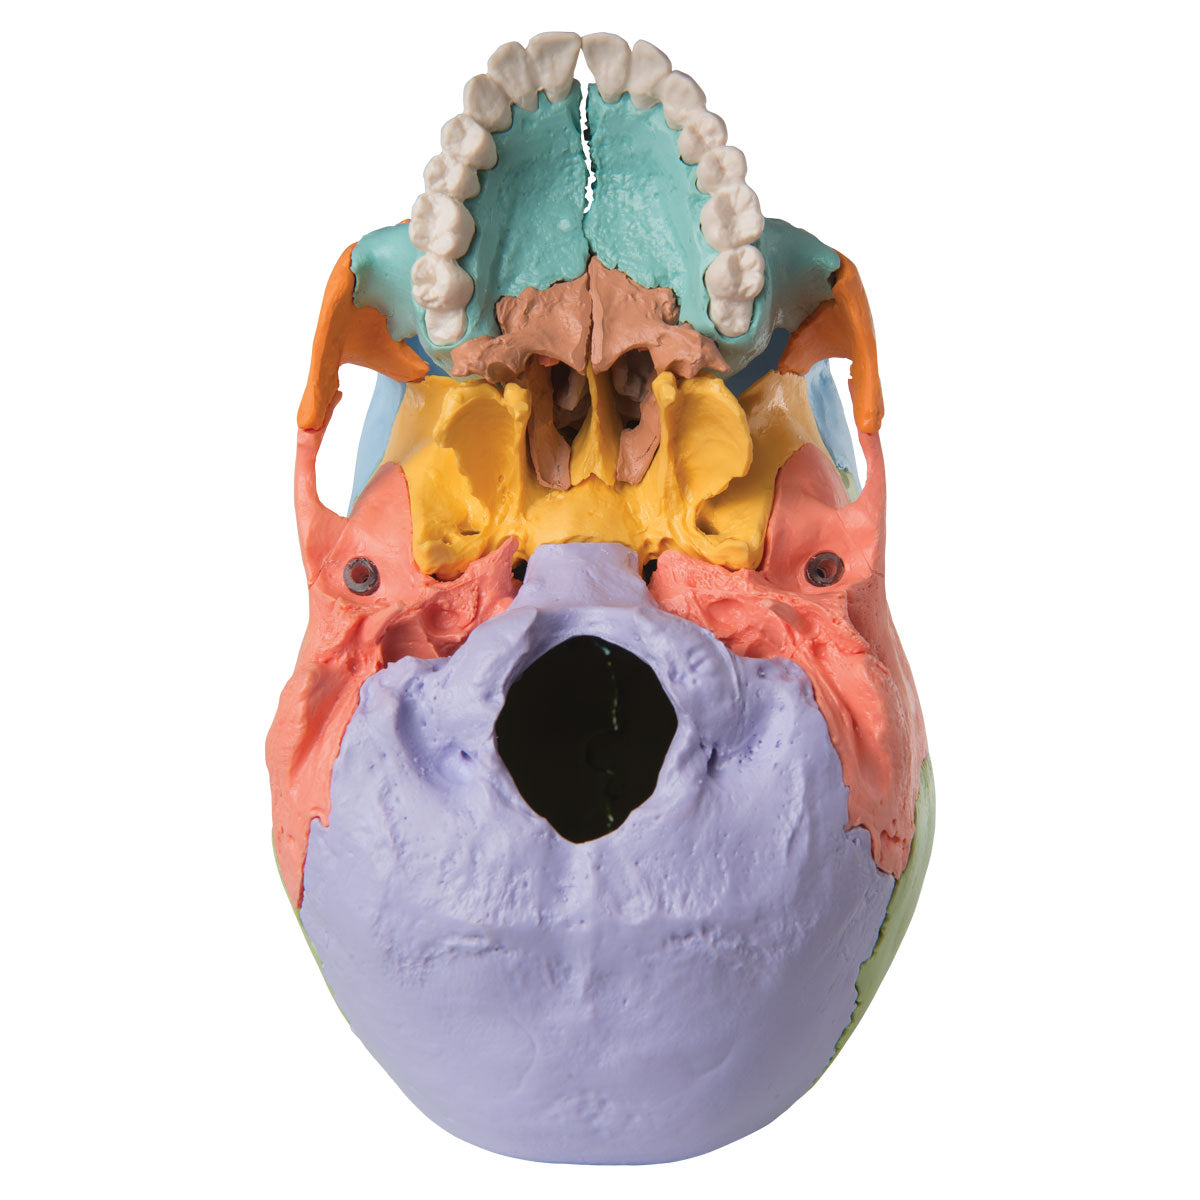 Skull model with educationally colored bones. Can be separated into 22 parts